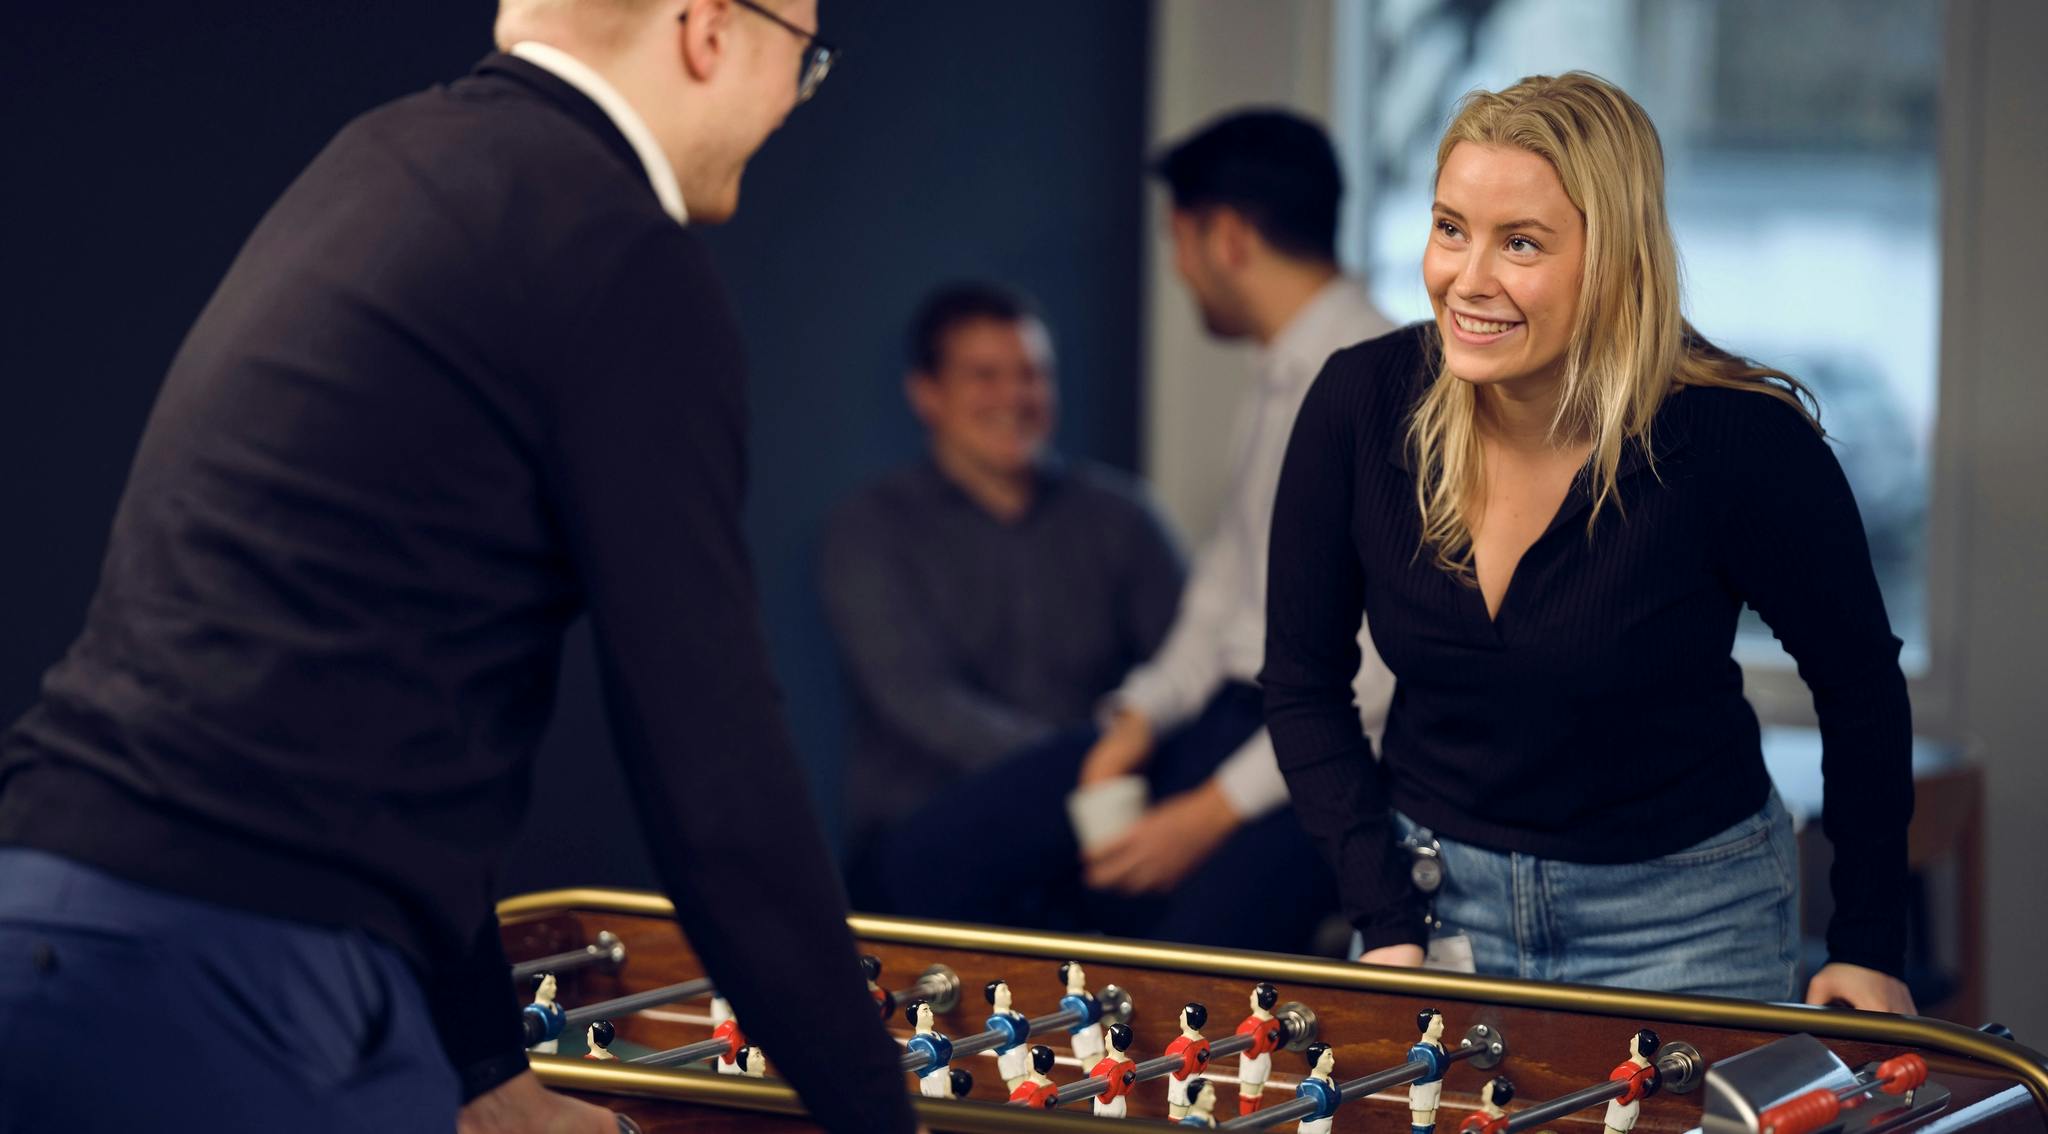 Two people playing table football